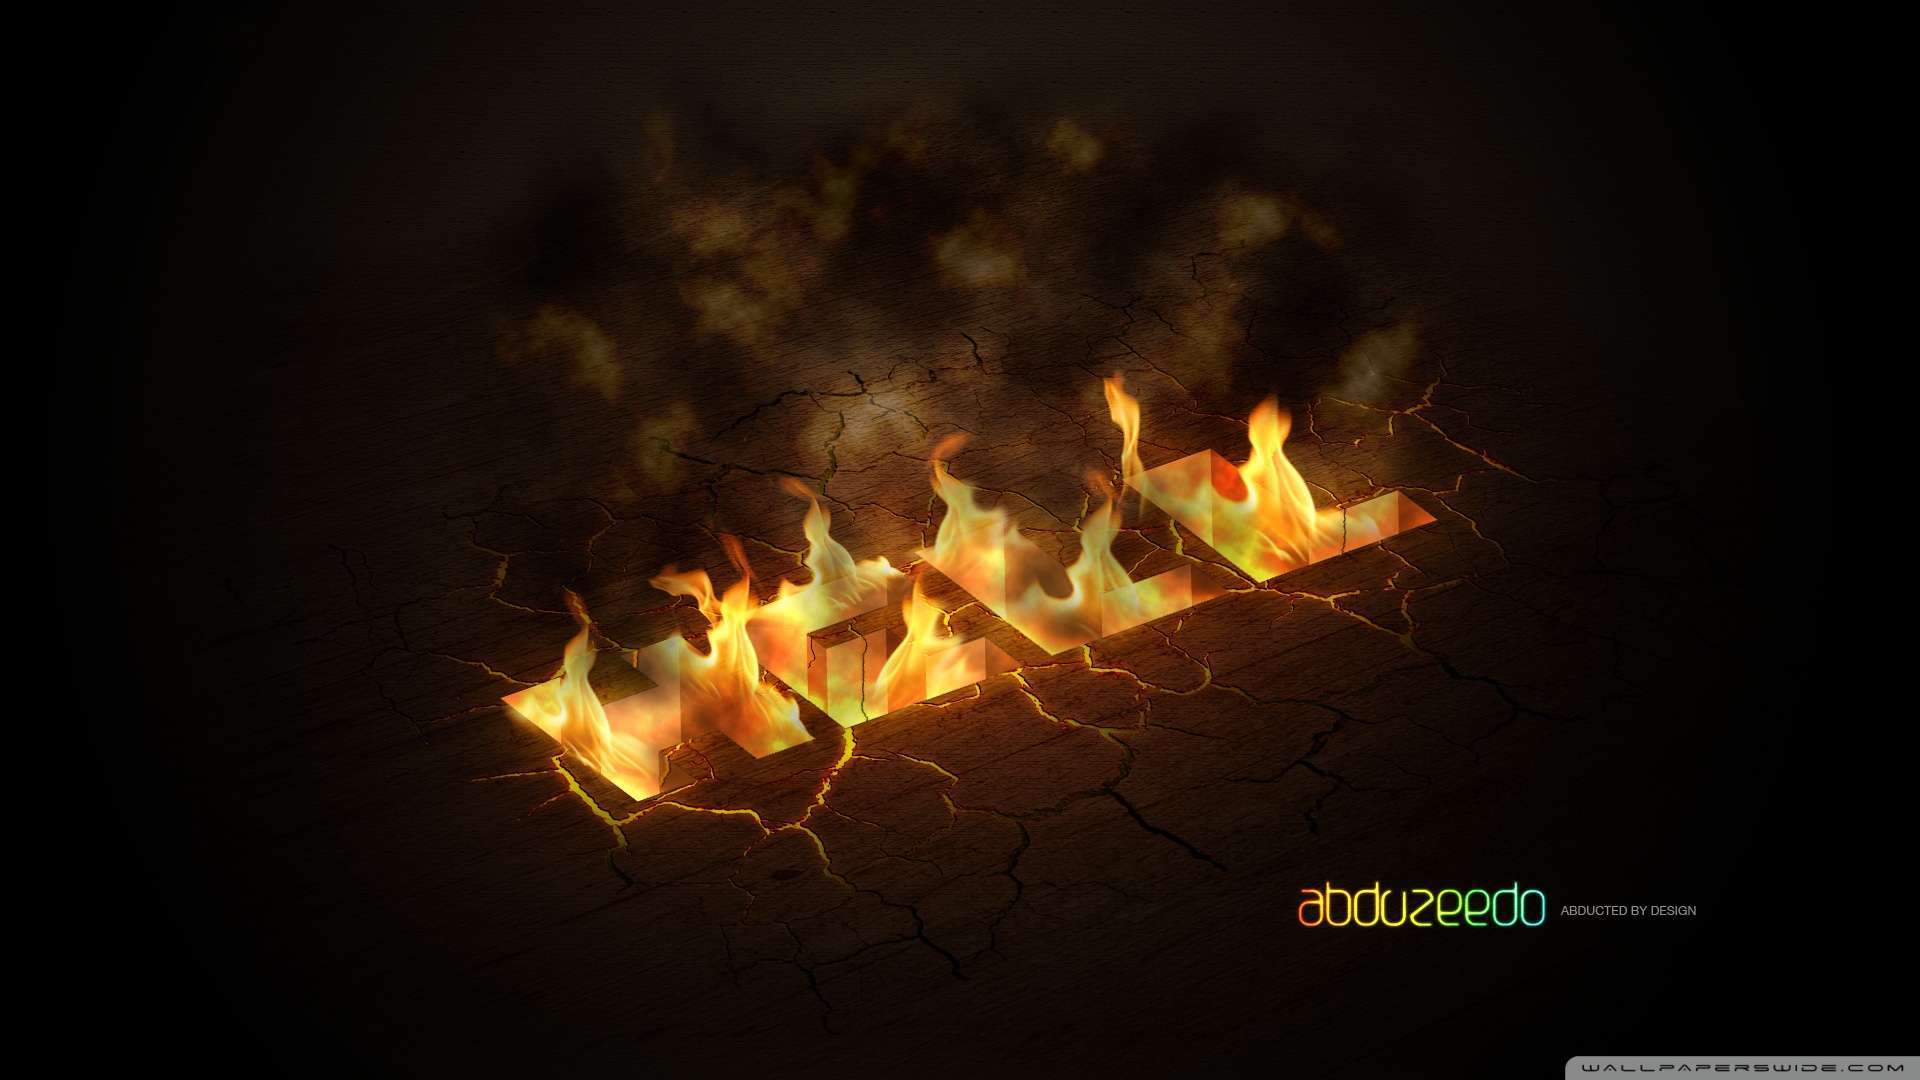 Wallpaper Burning Hell HD 1080p Upload At April By